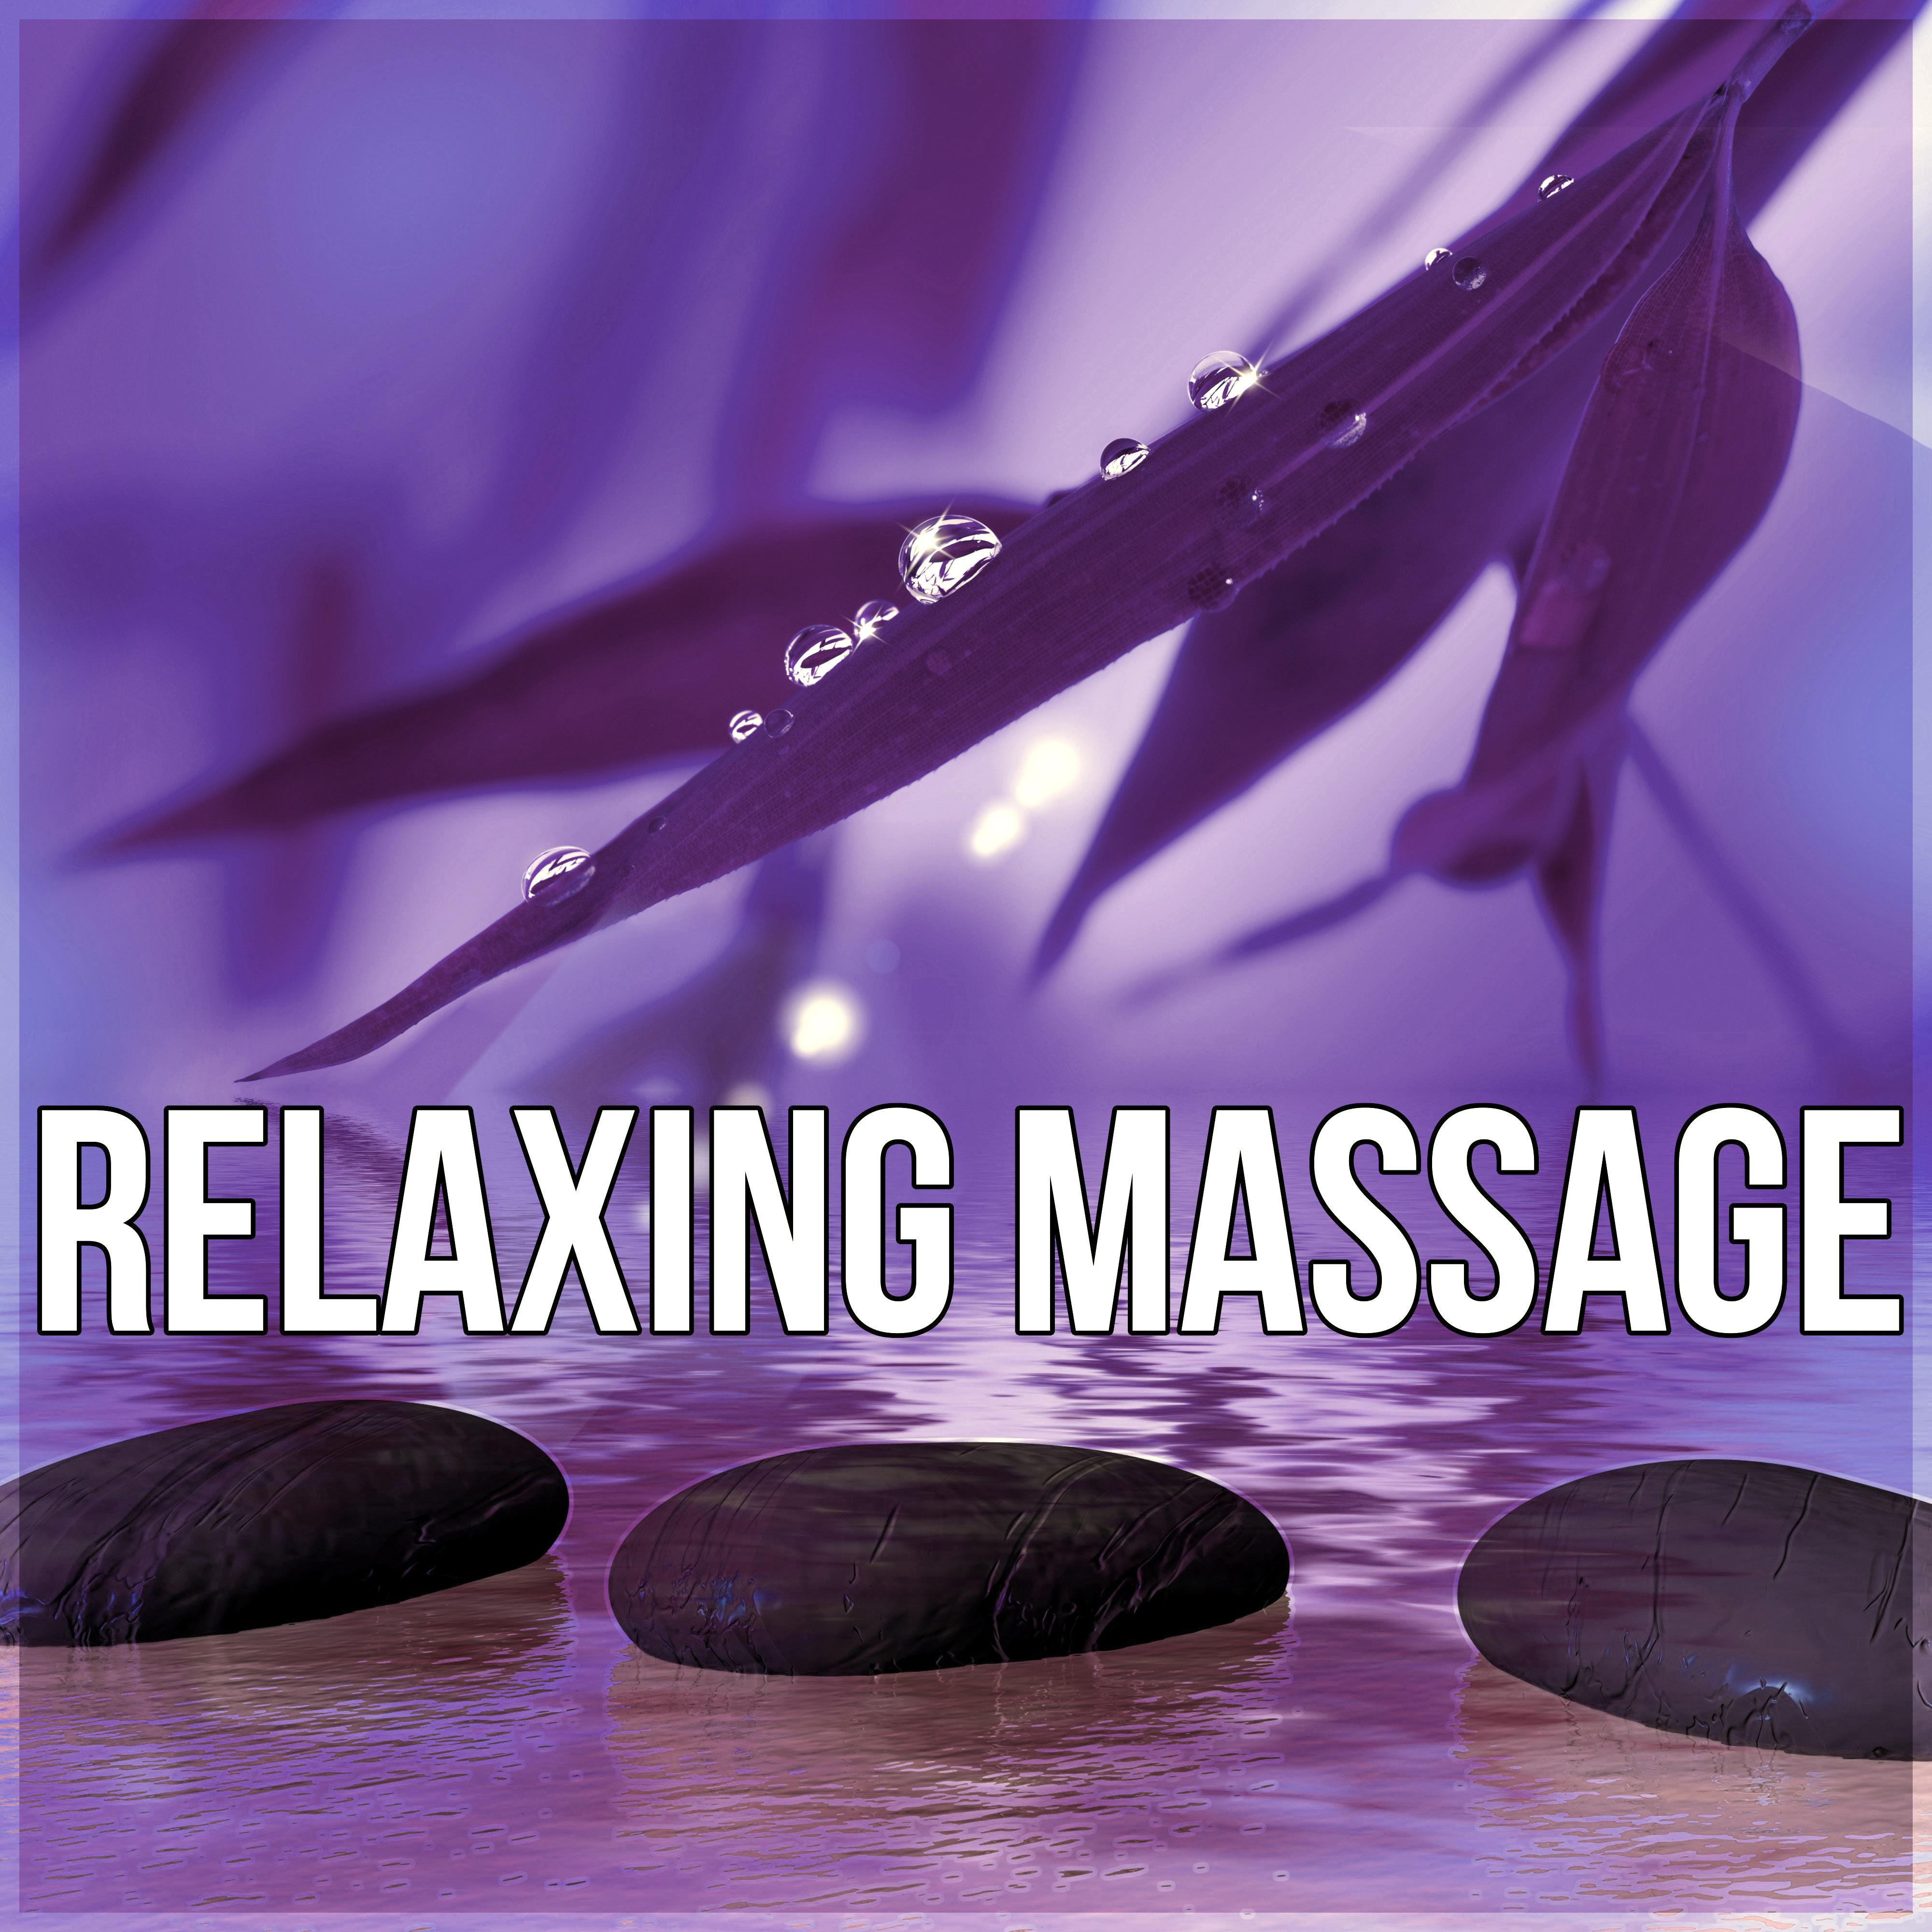 Relaxing Massage - Restful Sleep, Nature Sounds, Sensual Massage, Ocean Waves, Serenity Spa Relaxation